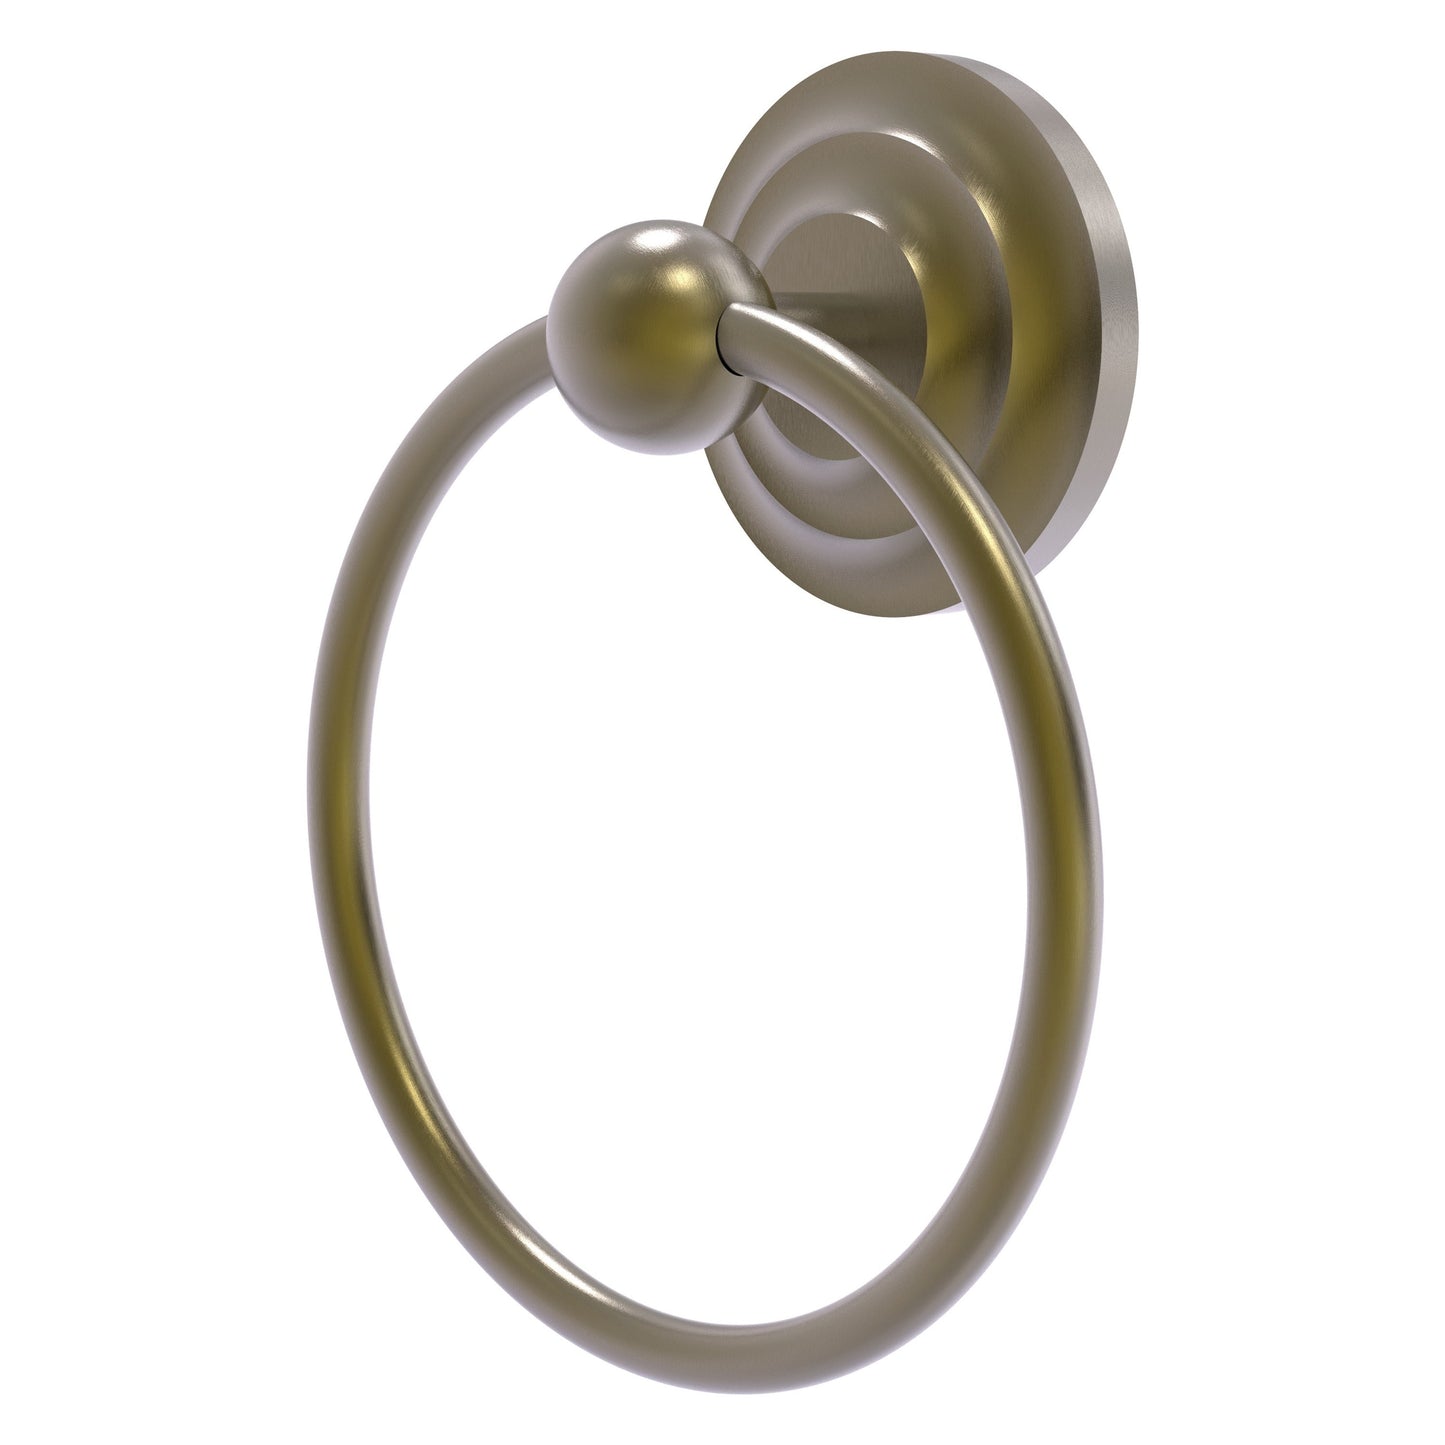 Allied Brass Que New 6" x 6" Antique Brass Solid Brass Towel Ring